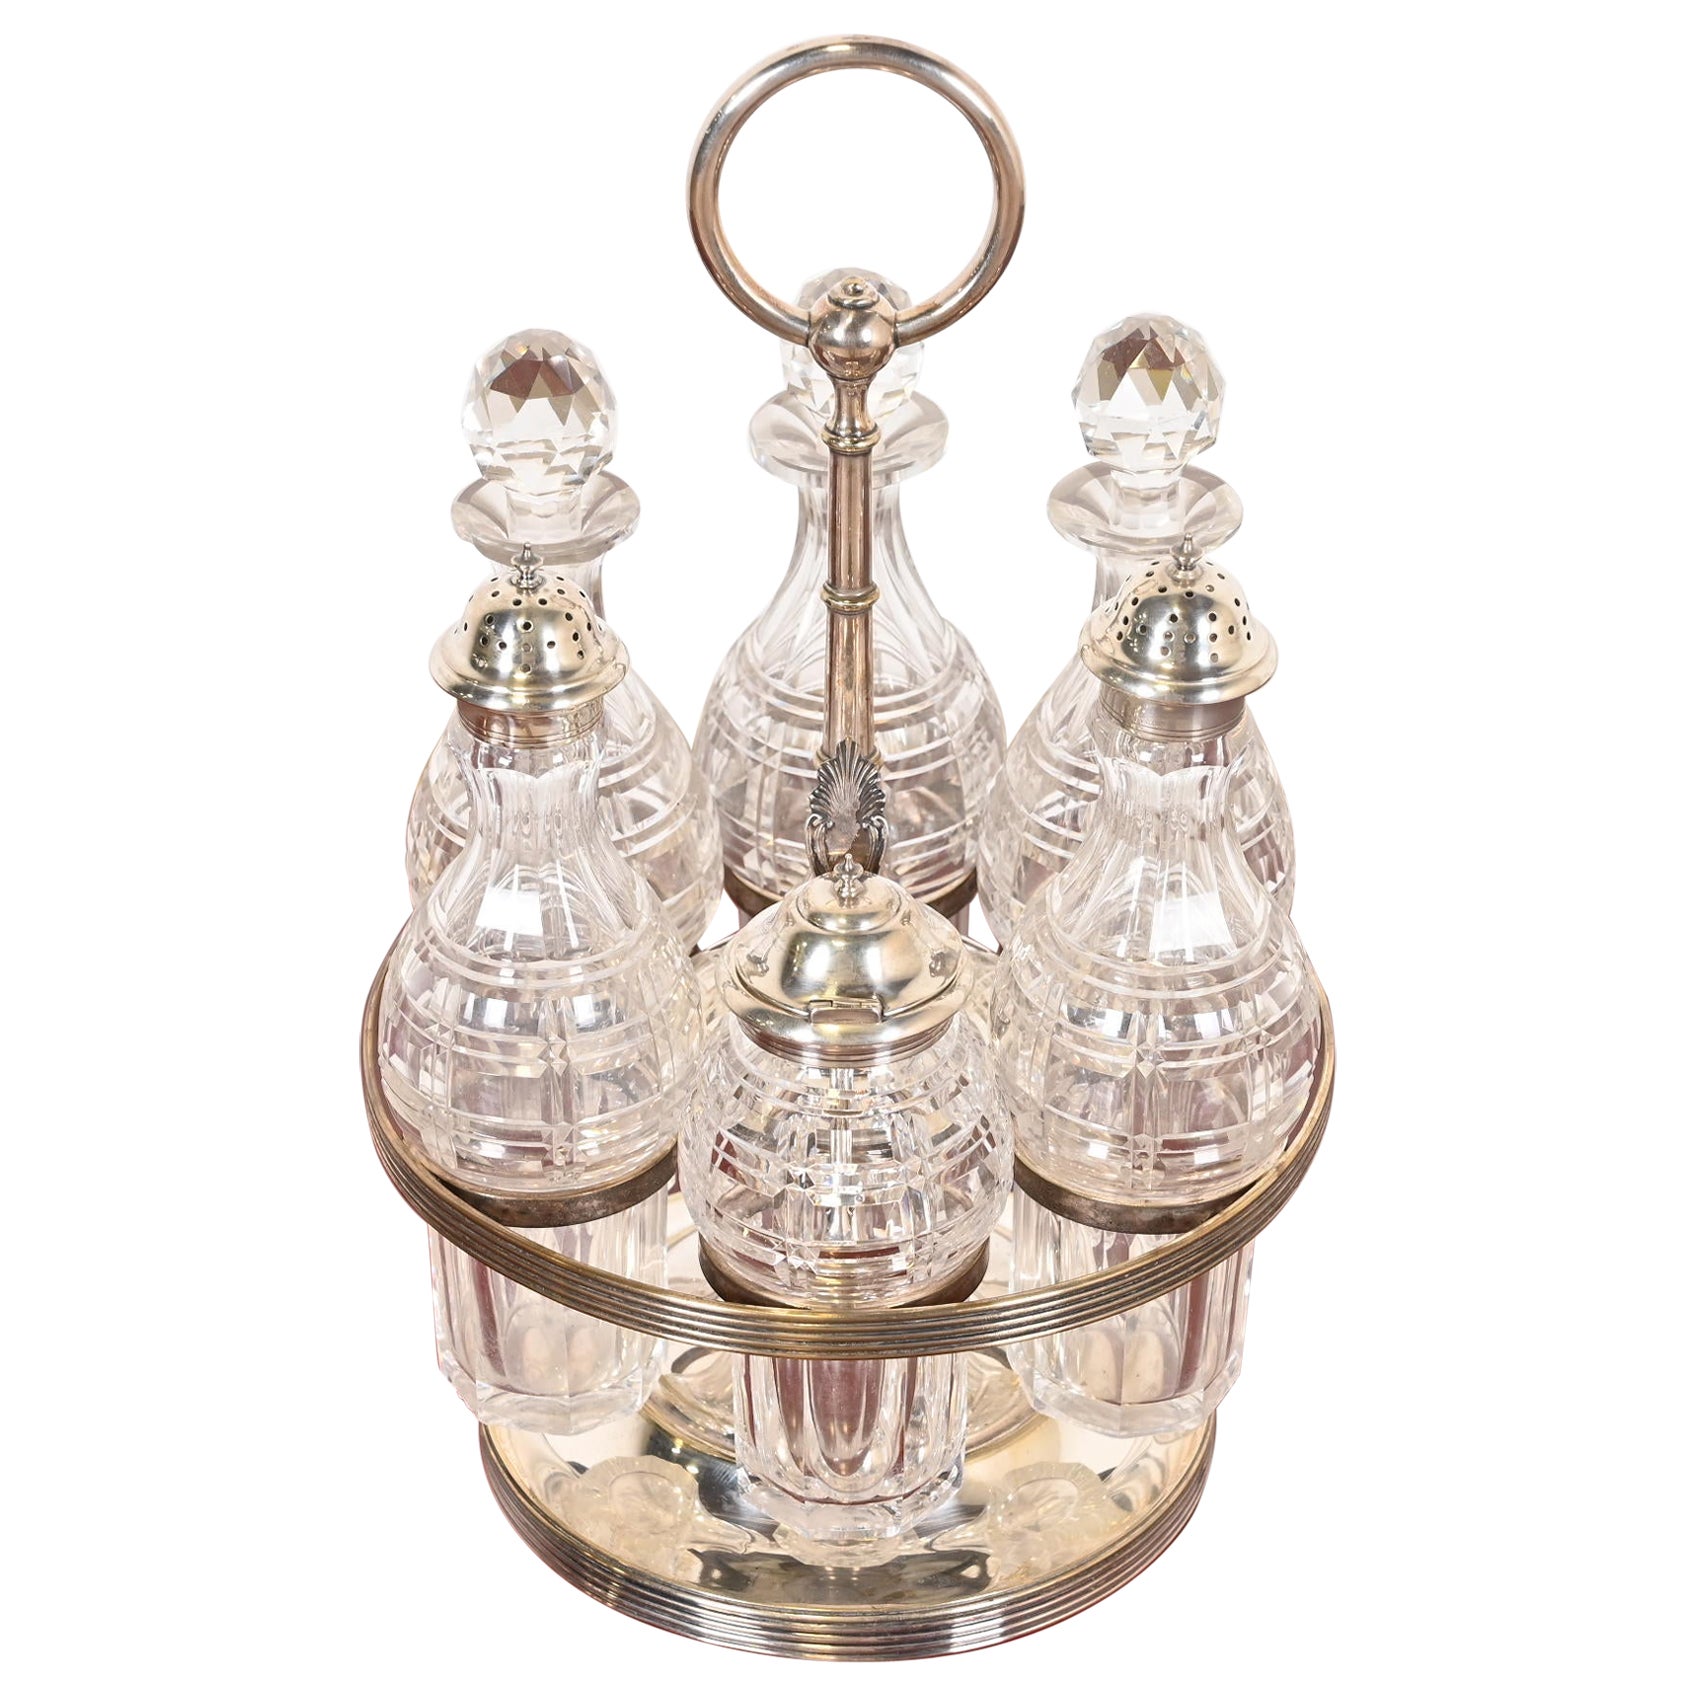 Tiffany & Co. Antique Silver Plate and Crystal Seven-Piece Cruet Set For Sale